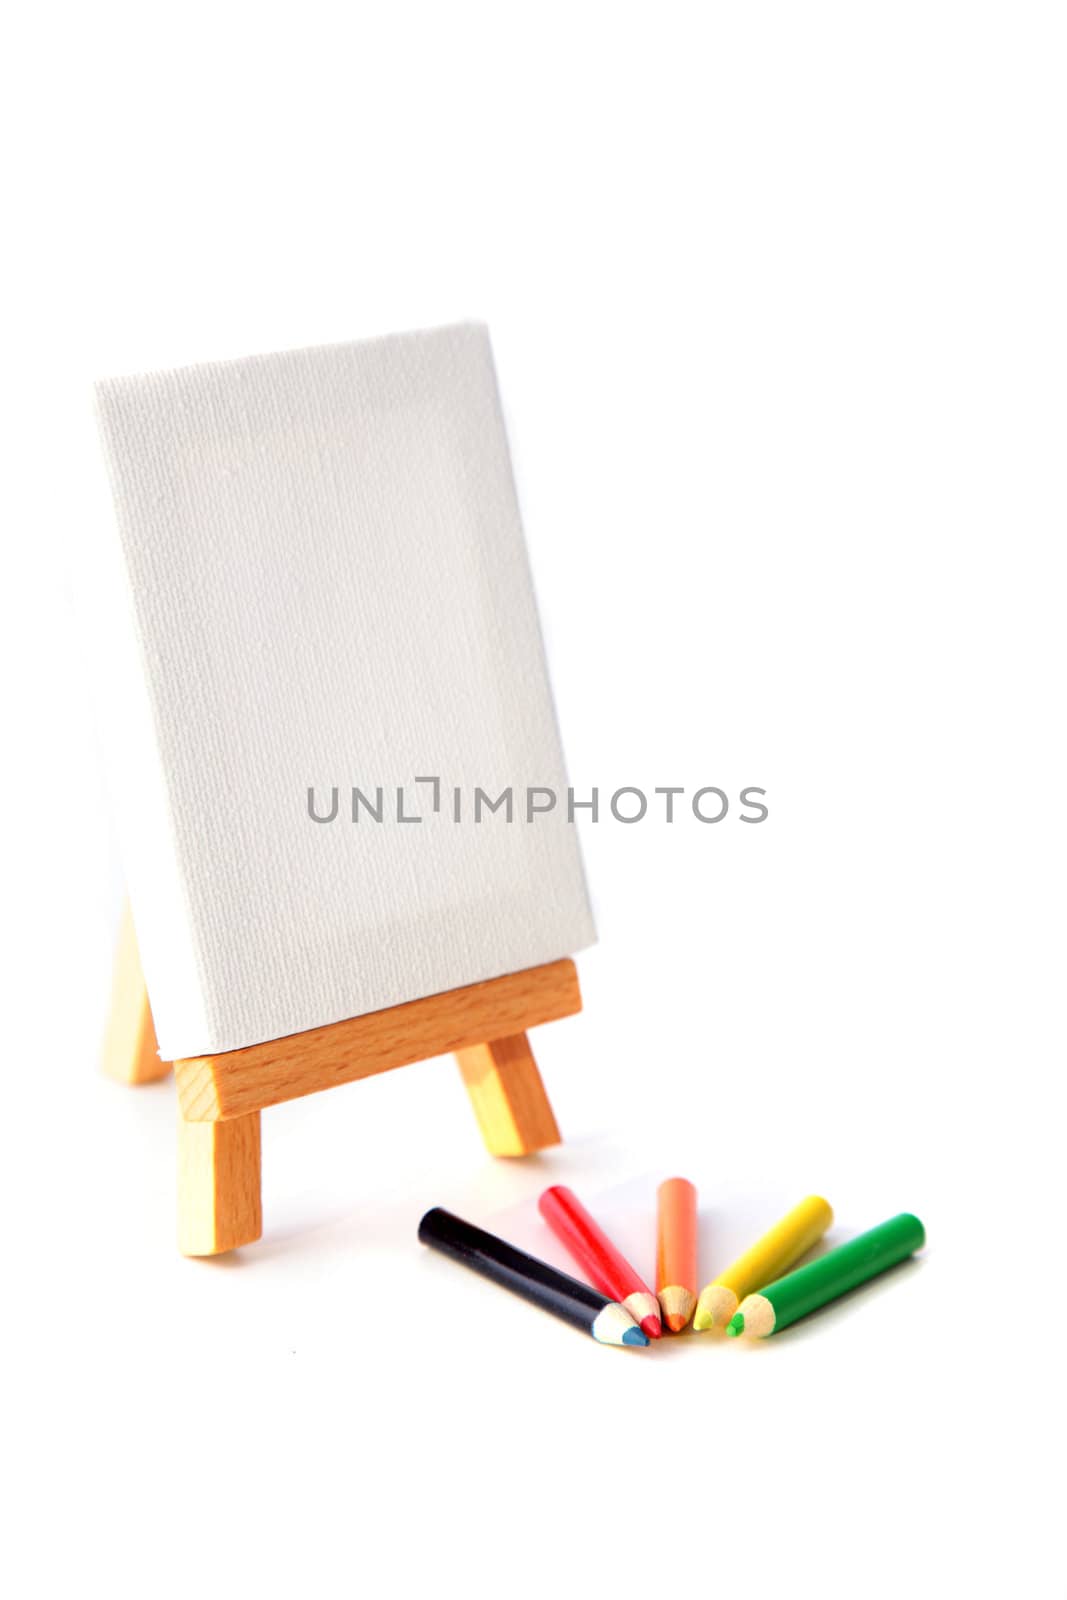 Several colorful pencils lying next to a scaffold. All on white background.